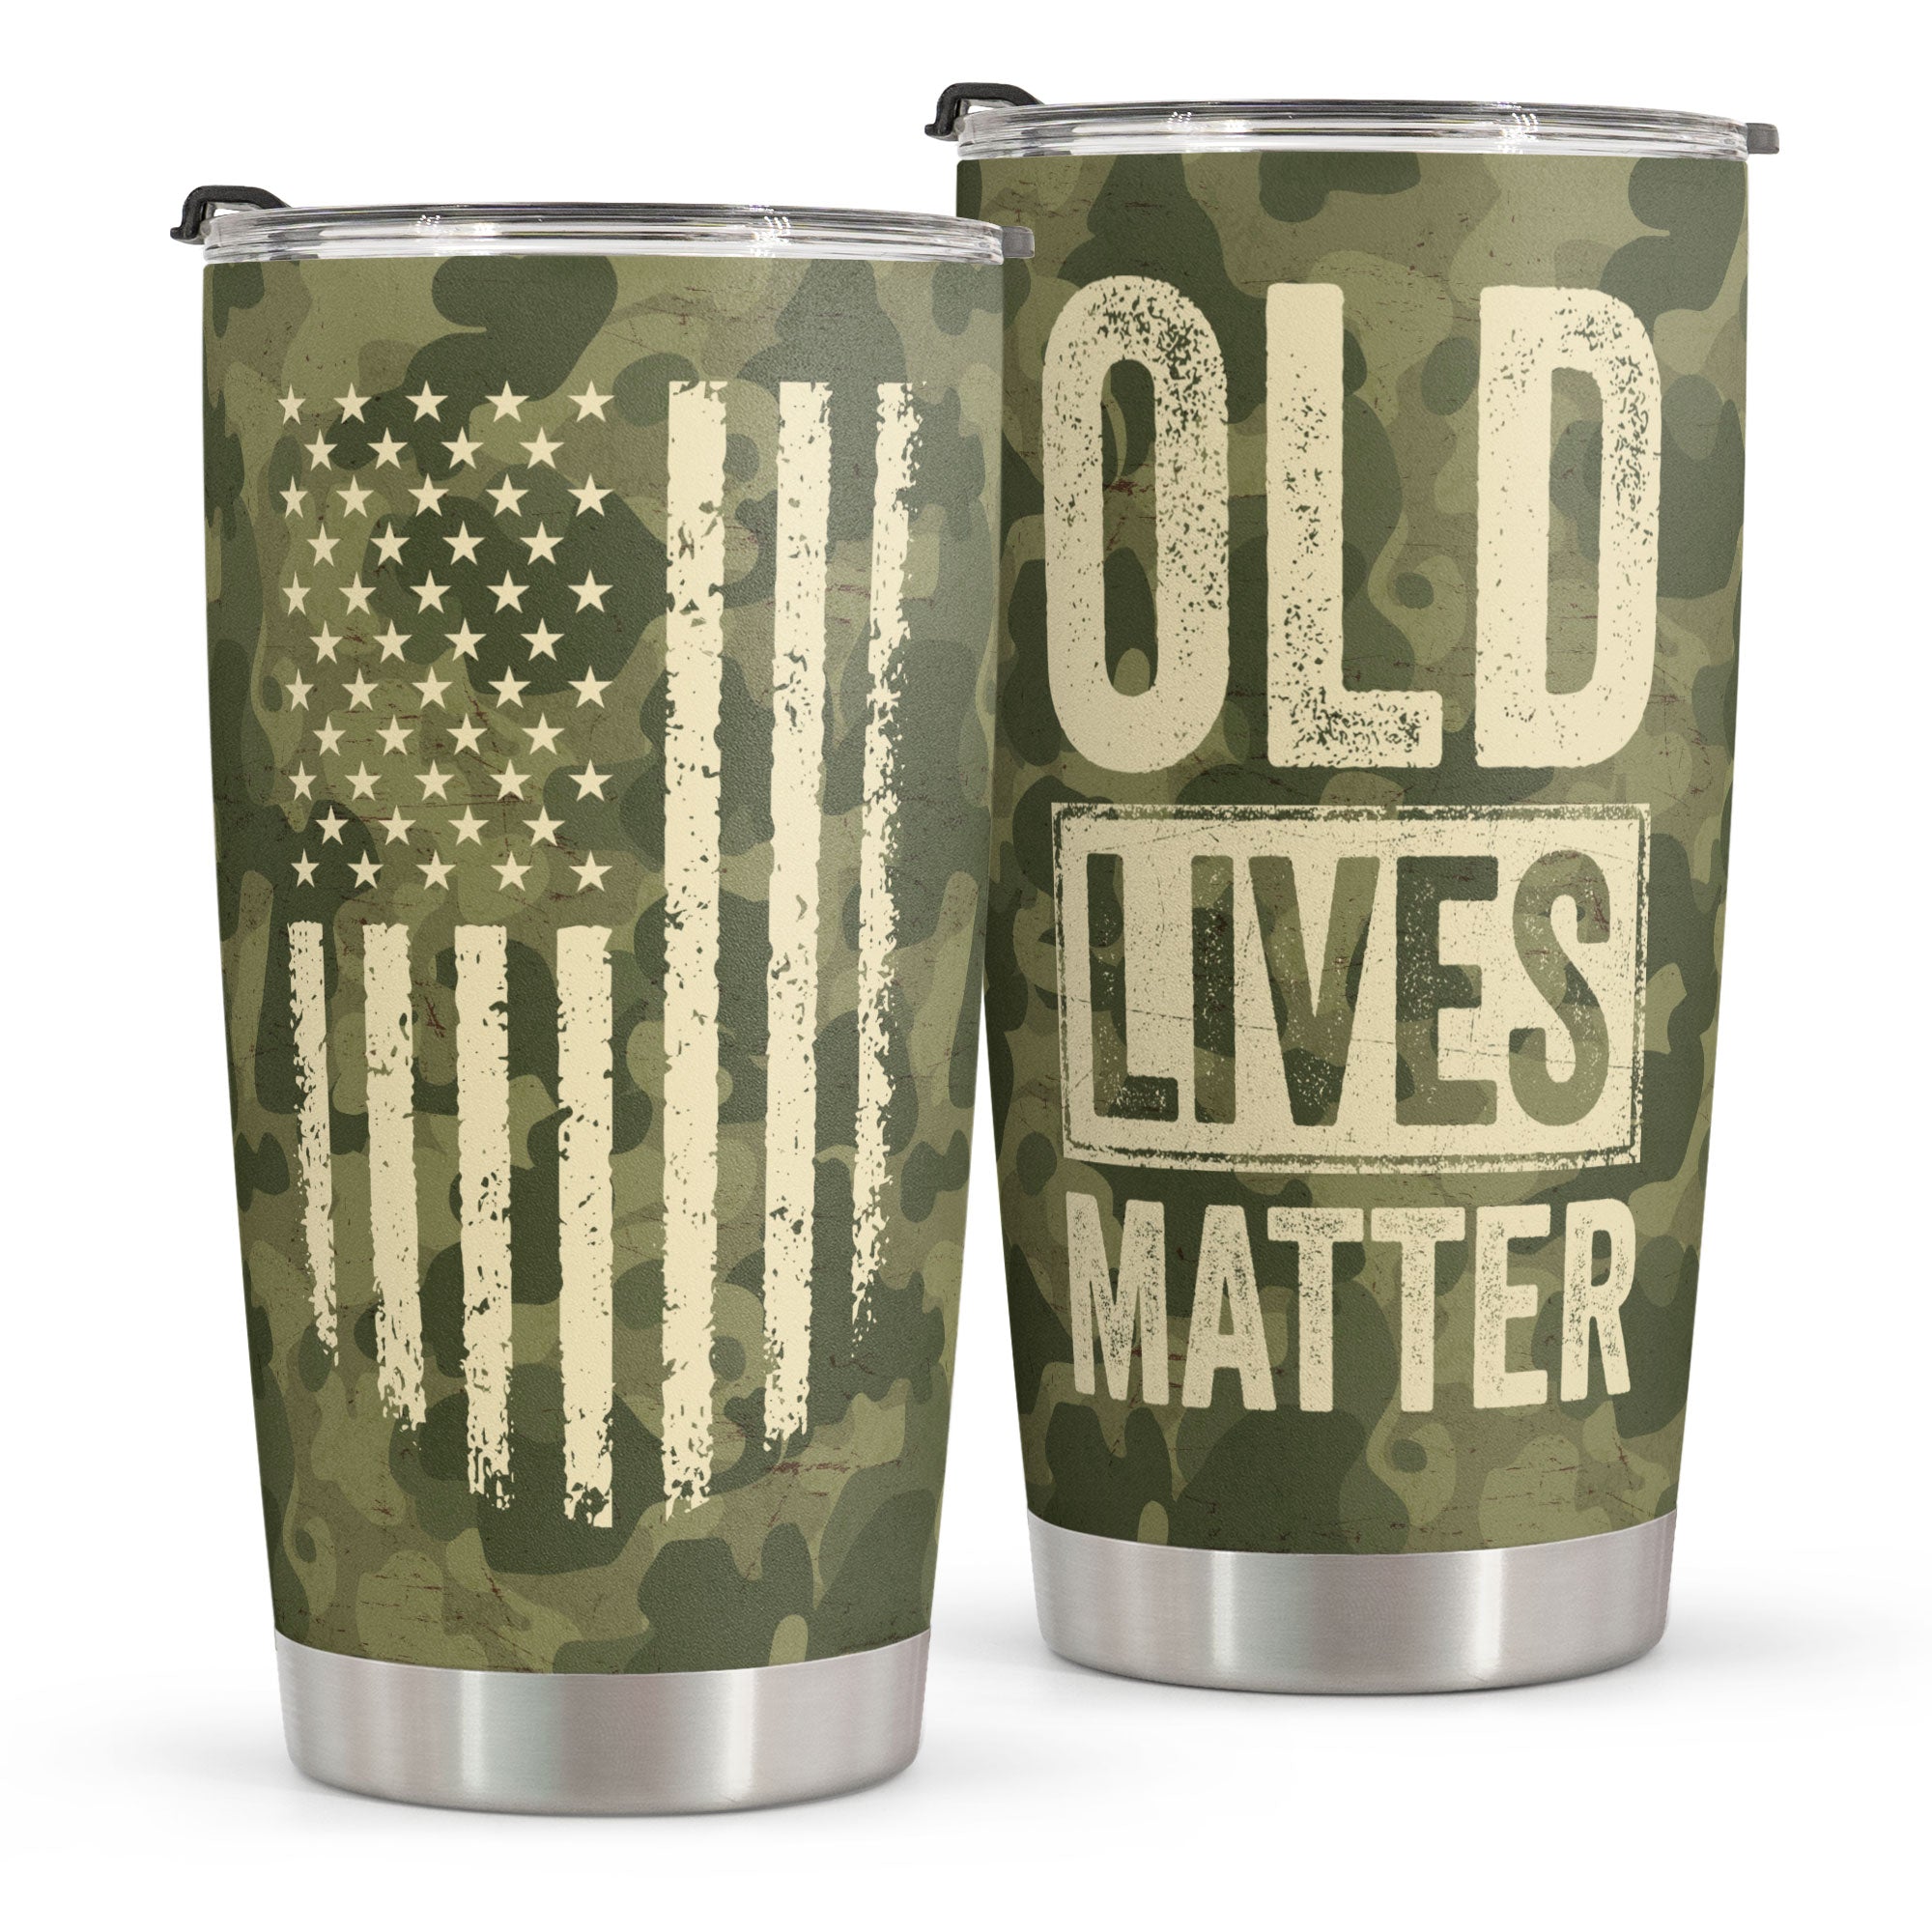 Image of Old Lives Matter - Tumbler Cup - Christmas, Birthday, Veterans Day Gifts For Men, Dad, Husband, Brother